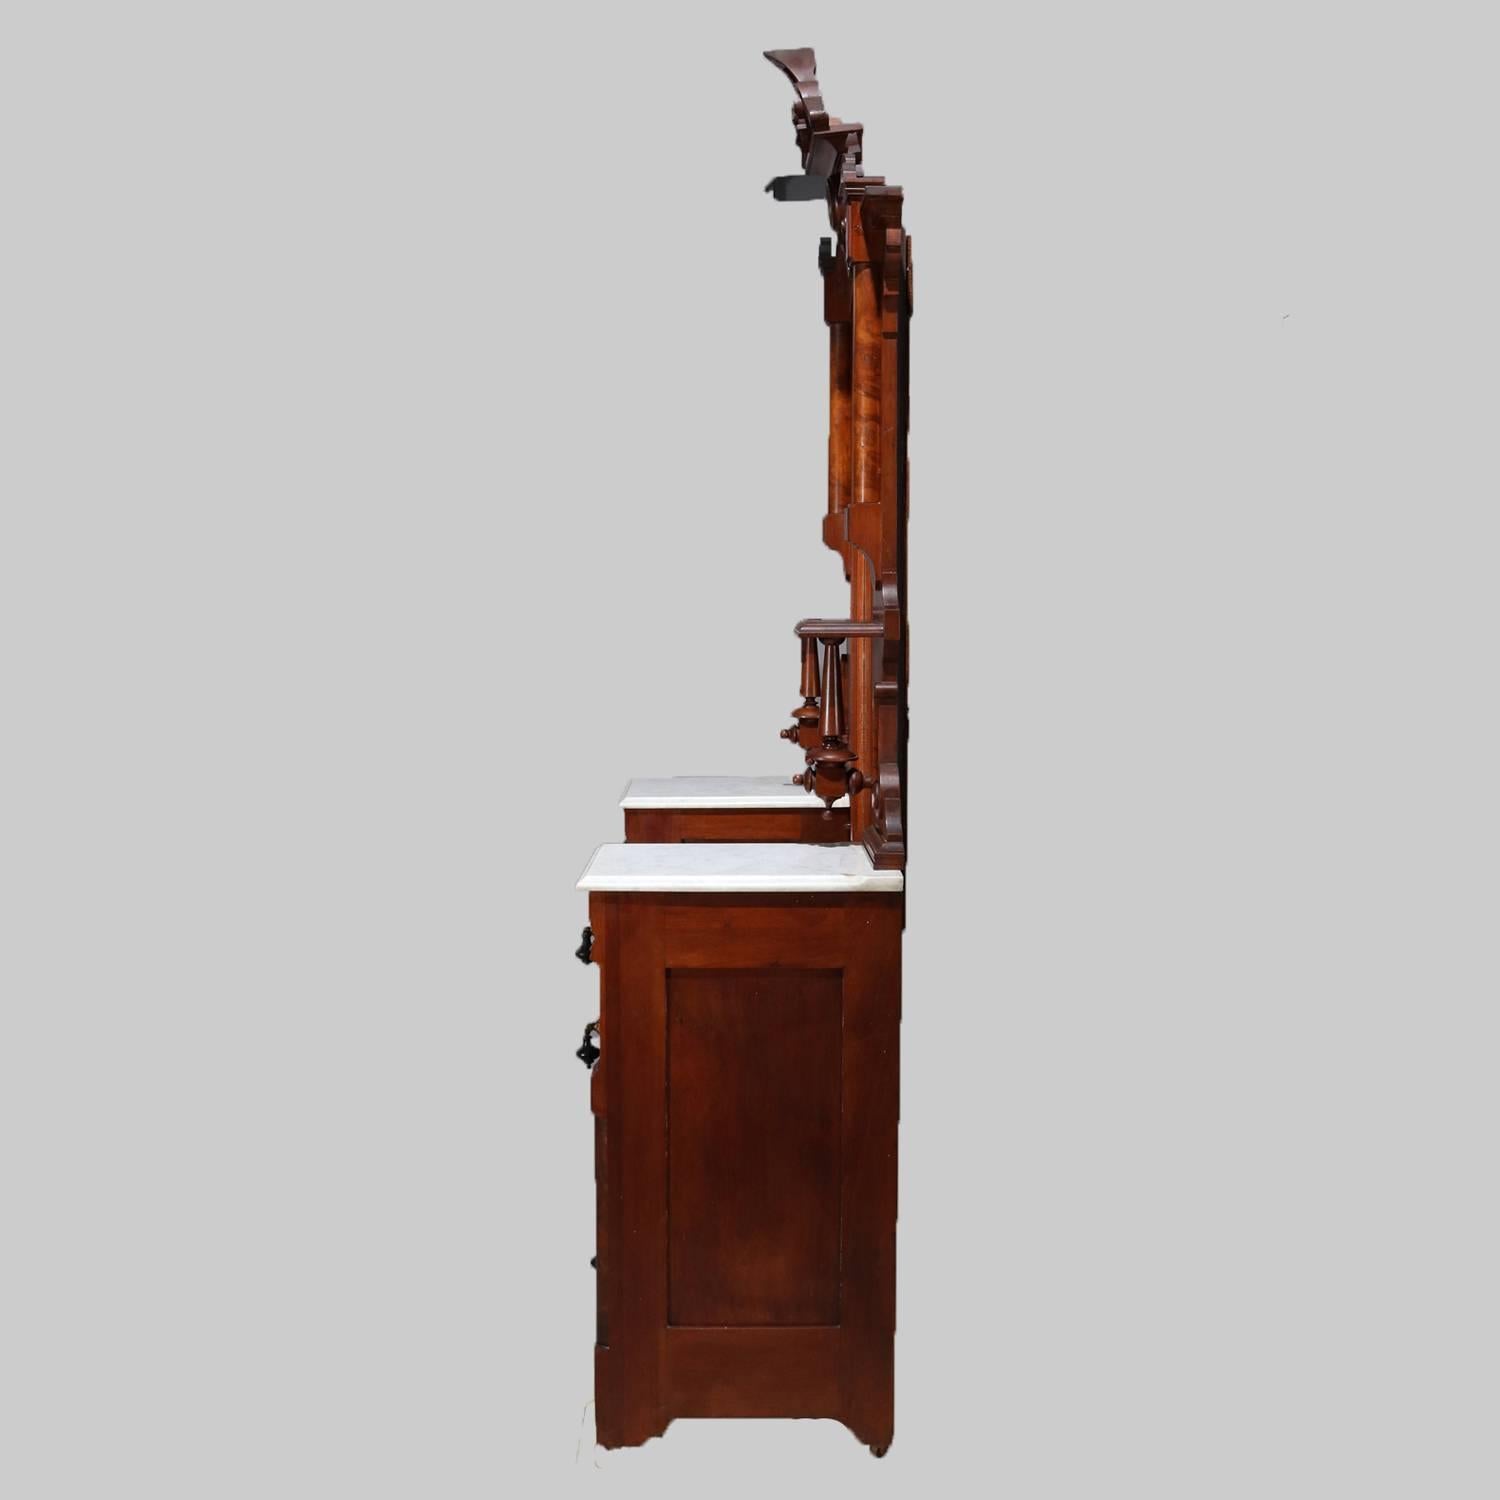 Antique Renaissance Revival carved dresser features carved fleur-de-lis crest over arched tall dressing mirror flanked by candle stands over marble top petite drawers with central sunken marble top over set of long drawers, circa 1890.

Measures: